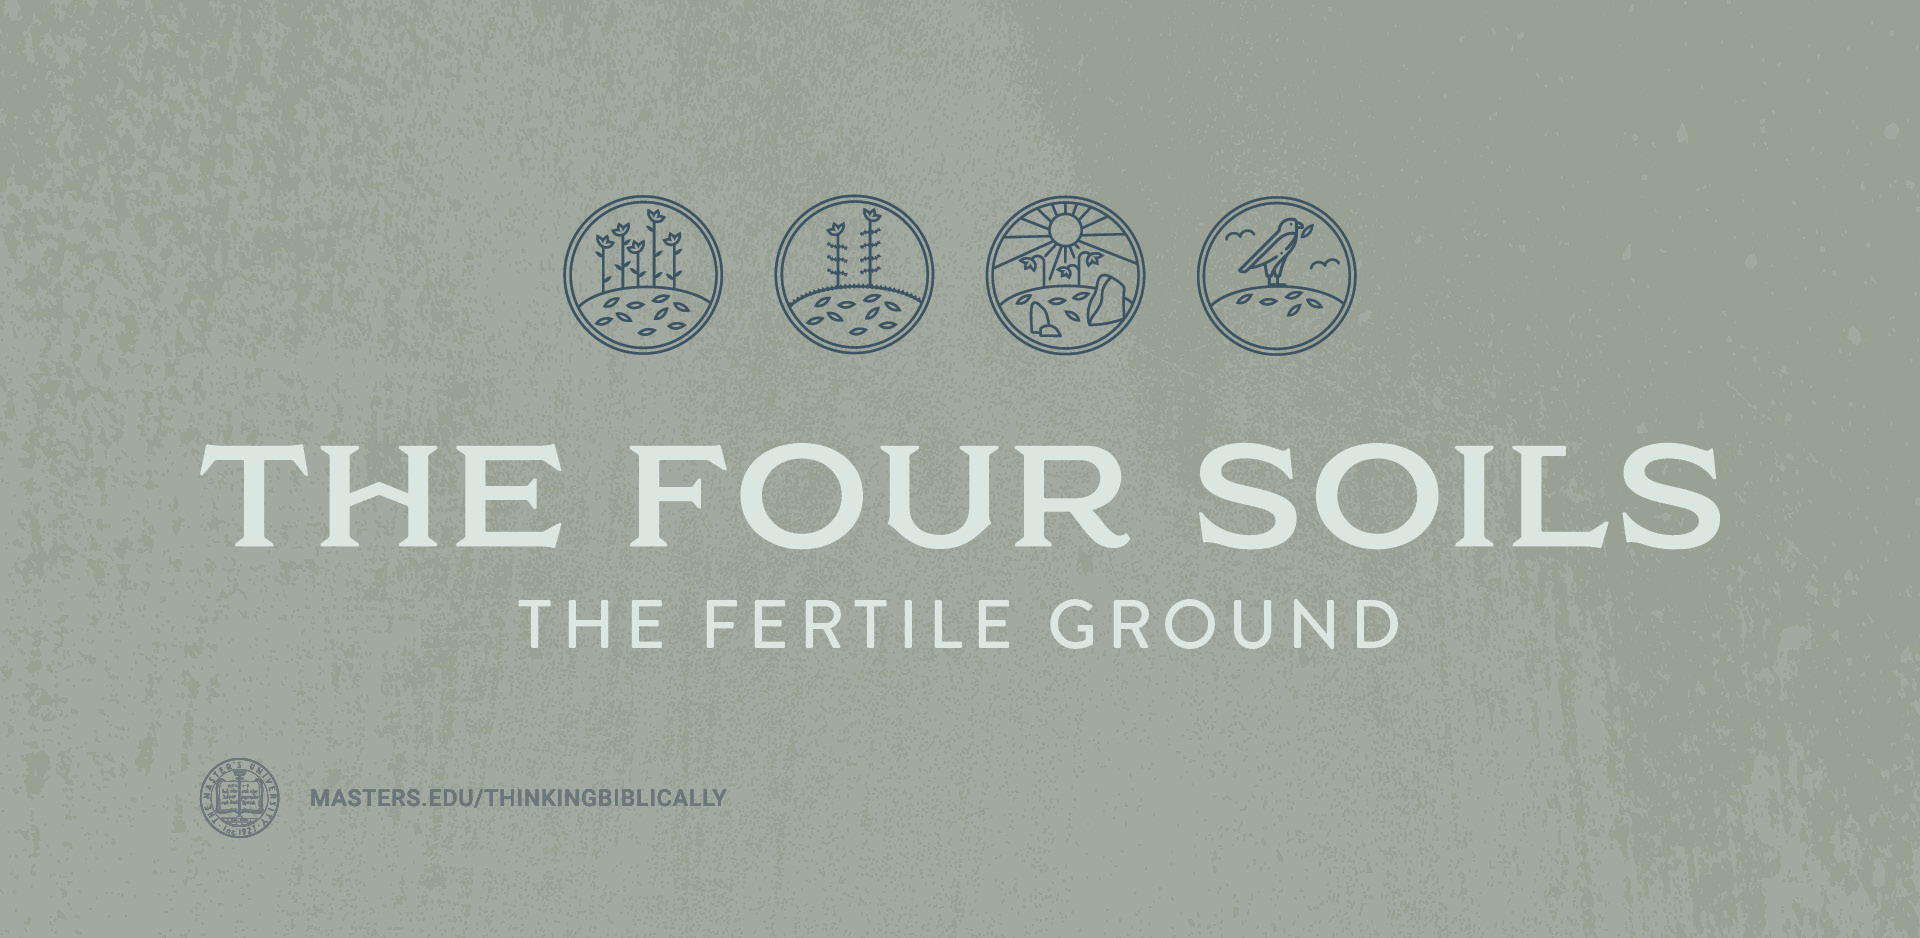 The Four Soils: The Fertile Ground Featured Image